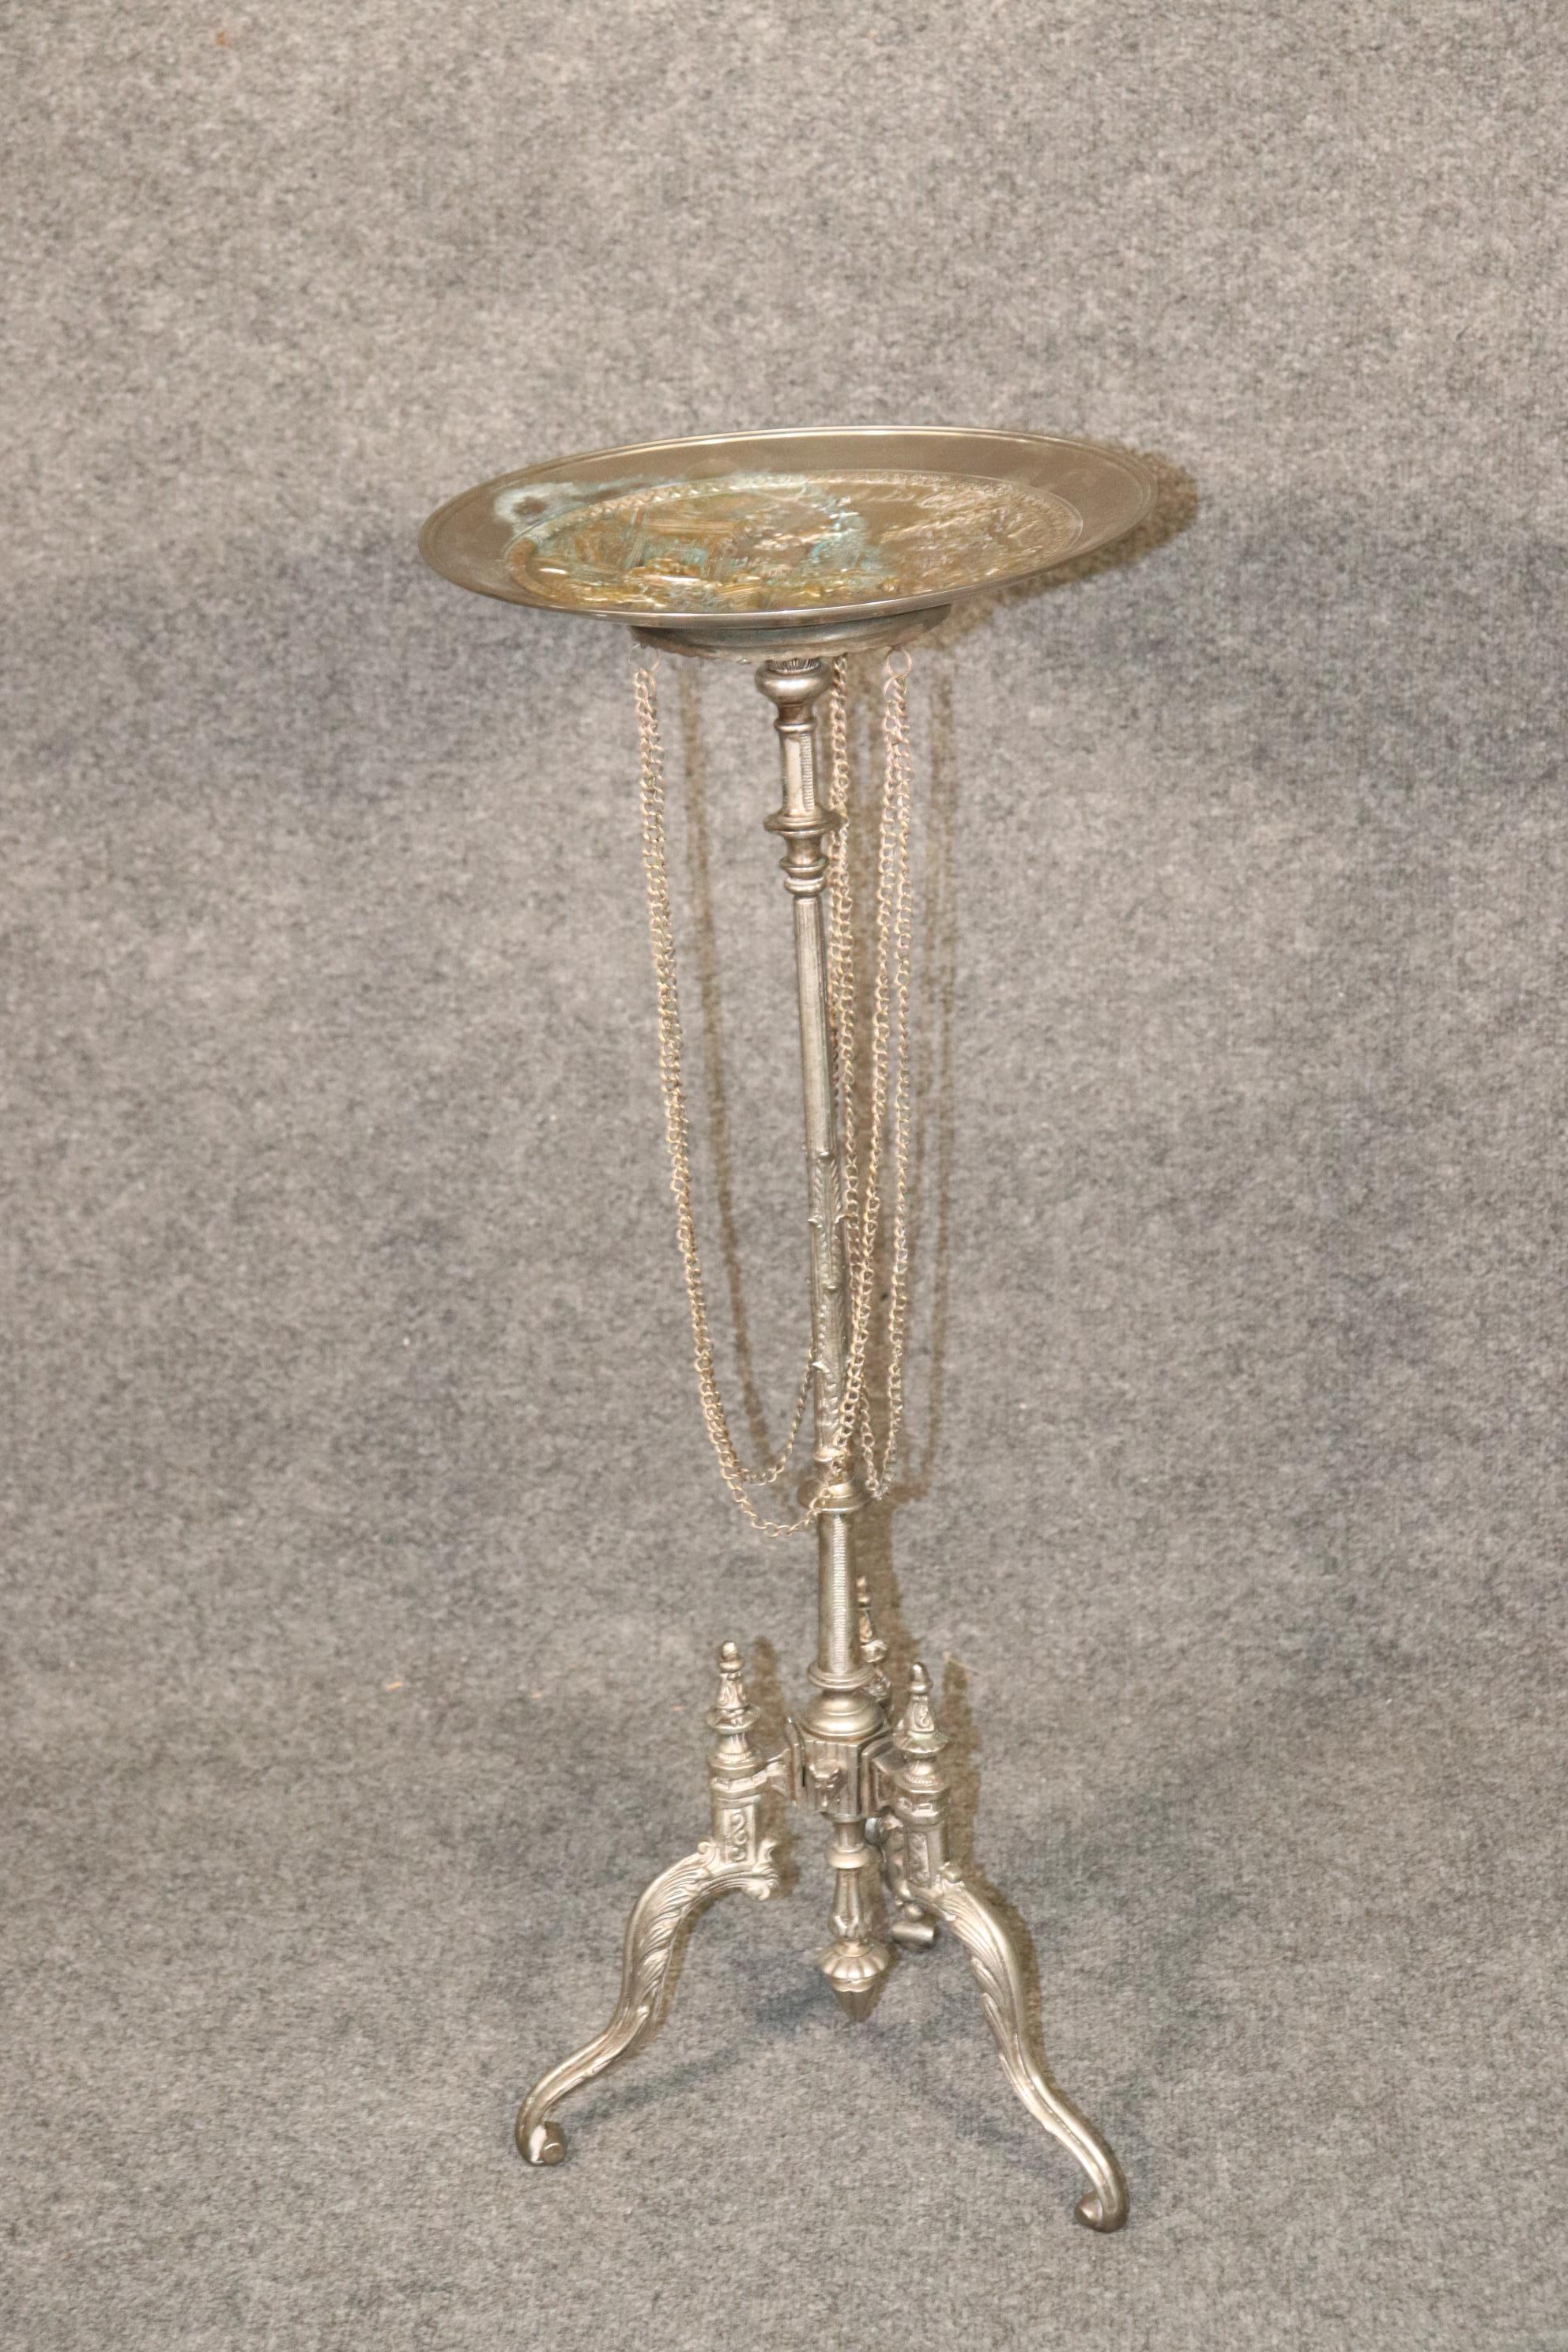 Dimensions- H: 32in W: 13in D: 13in 
This is a stunning calling card table. This was originally used for placing calling cards at parties. The top is embossed heavy brass or polished bronze and depicts an elaborate Greek mythological scene with